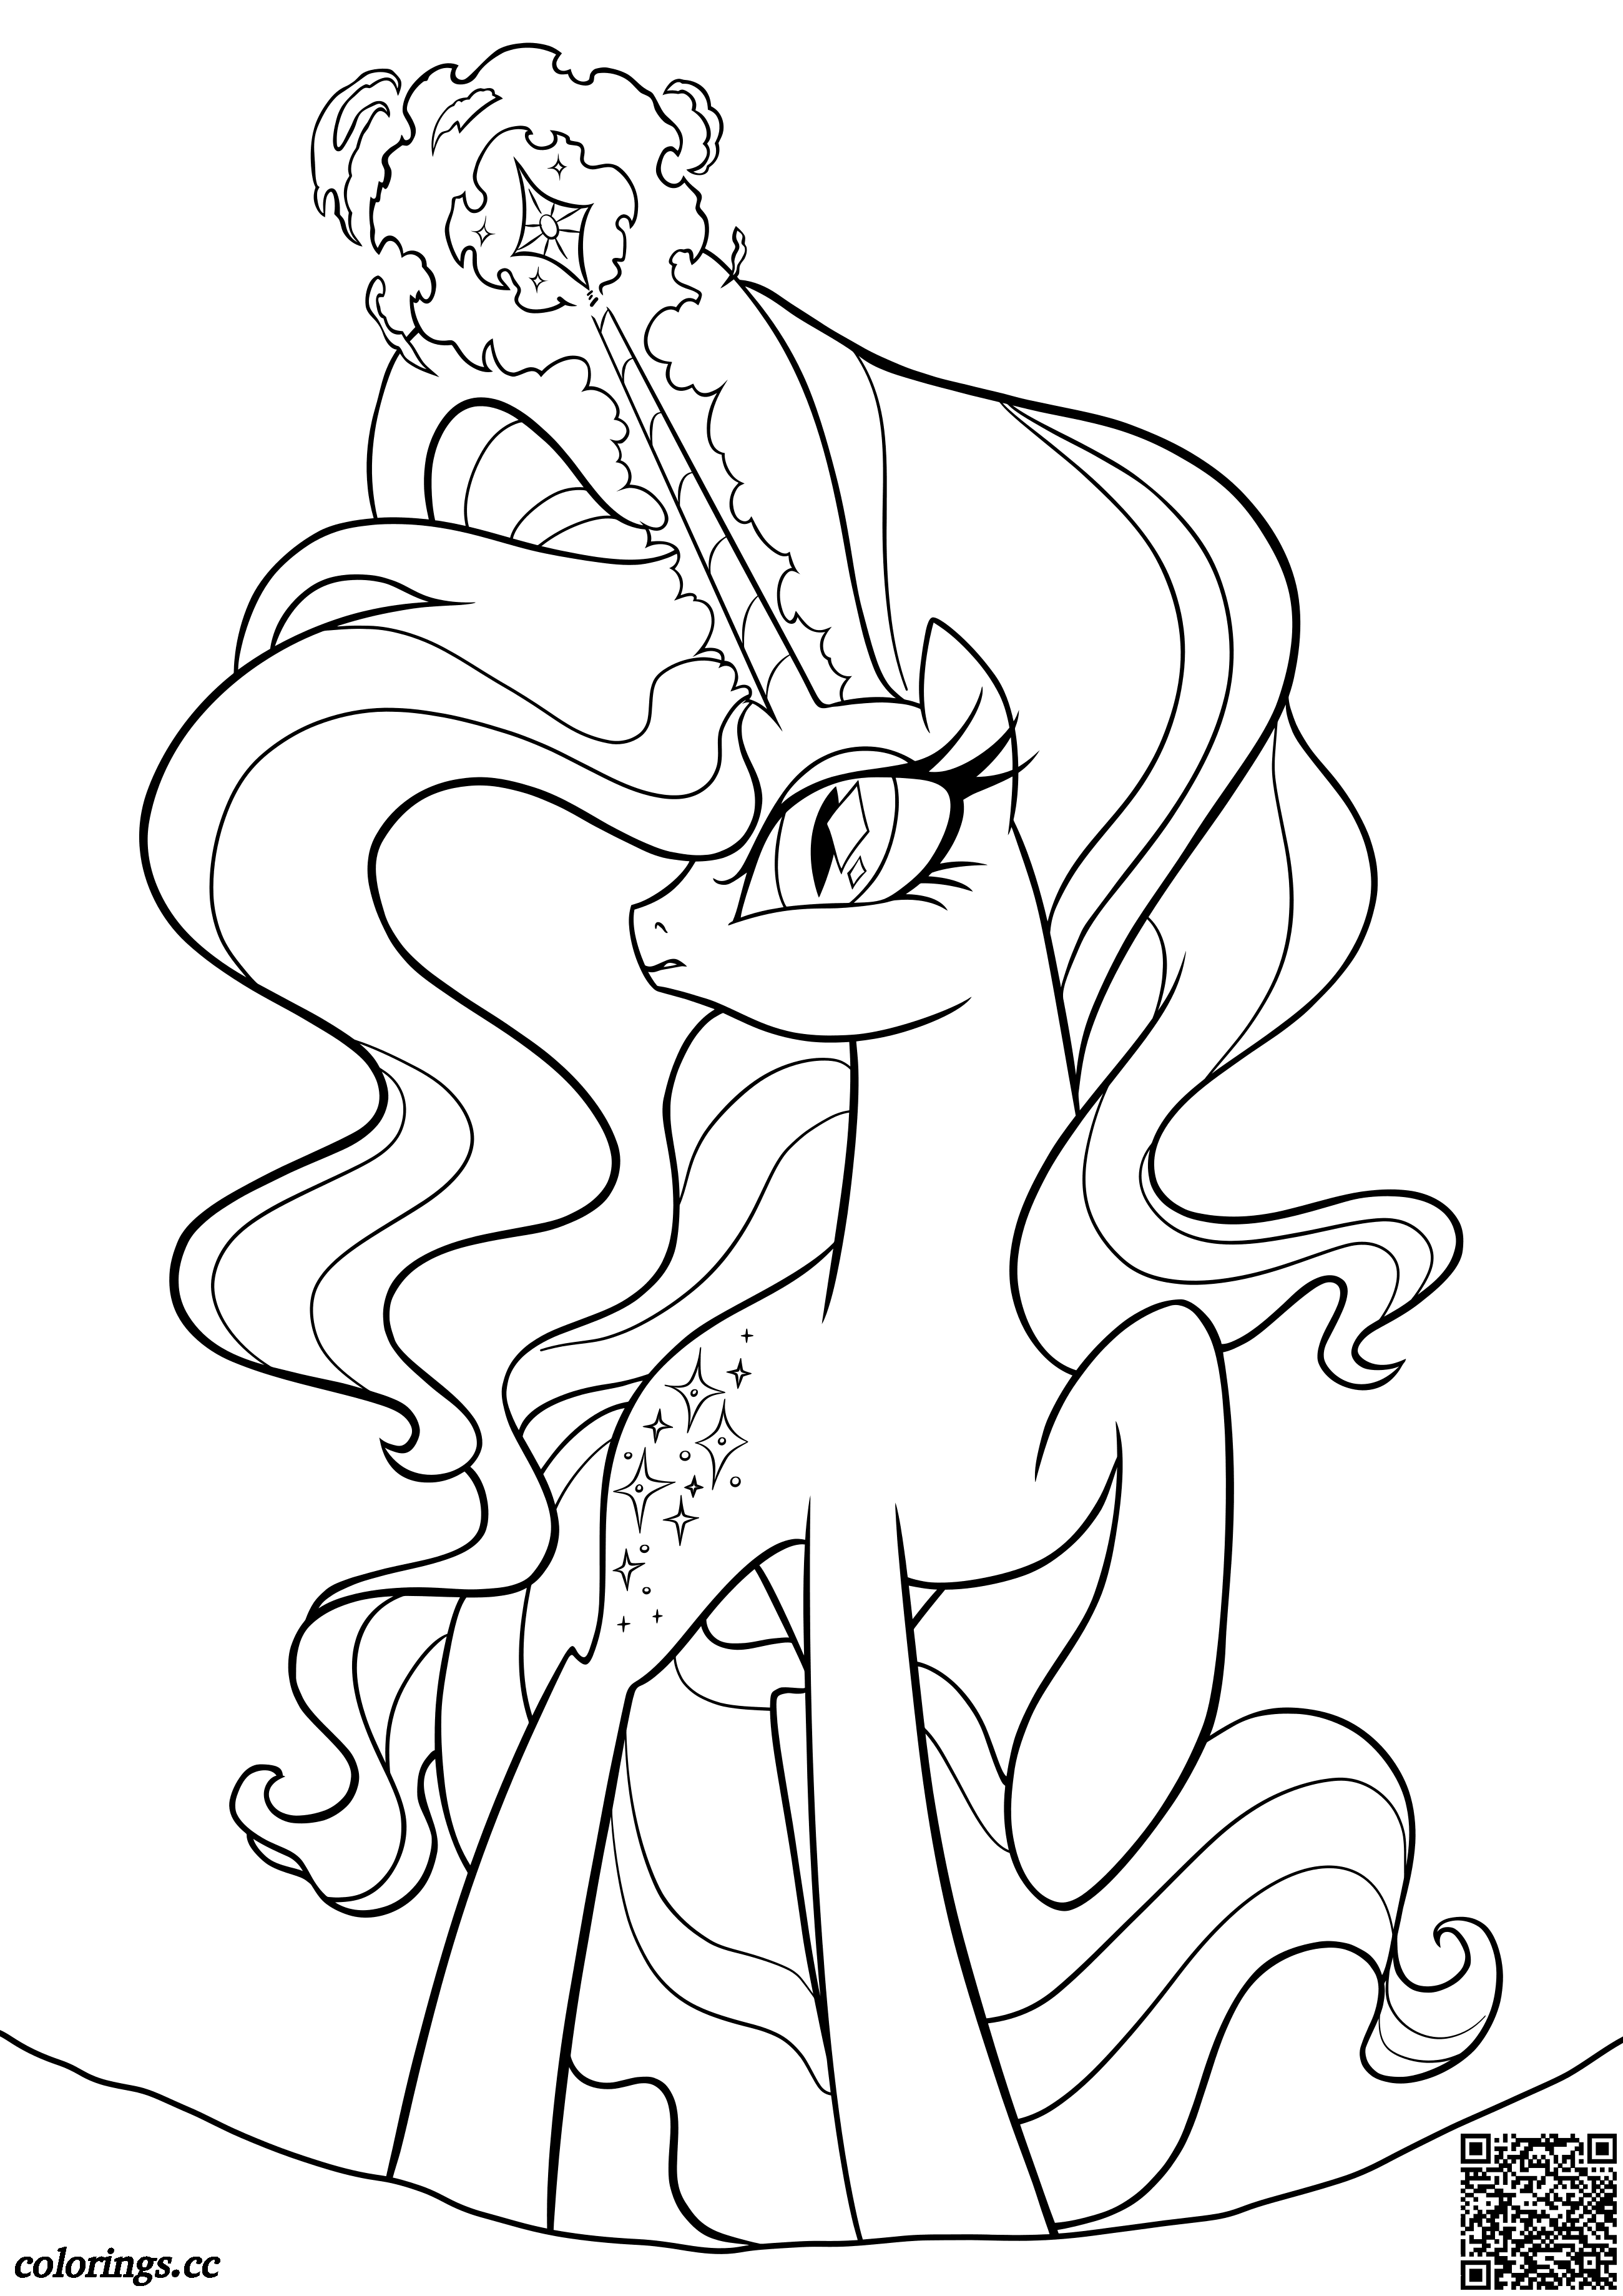 Nightmare Rarity coloring pages, My Little Pony Friendship Is ...